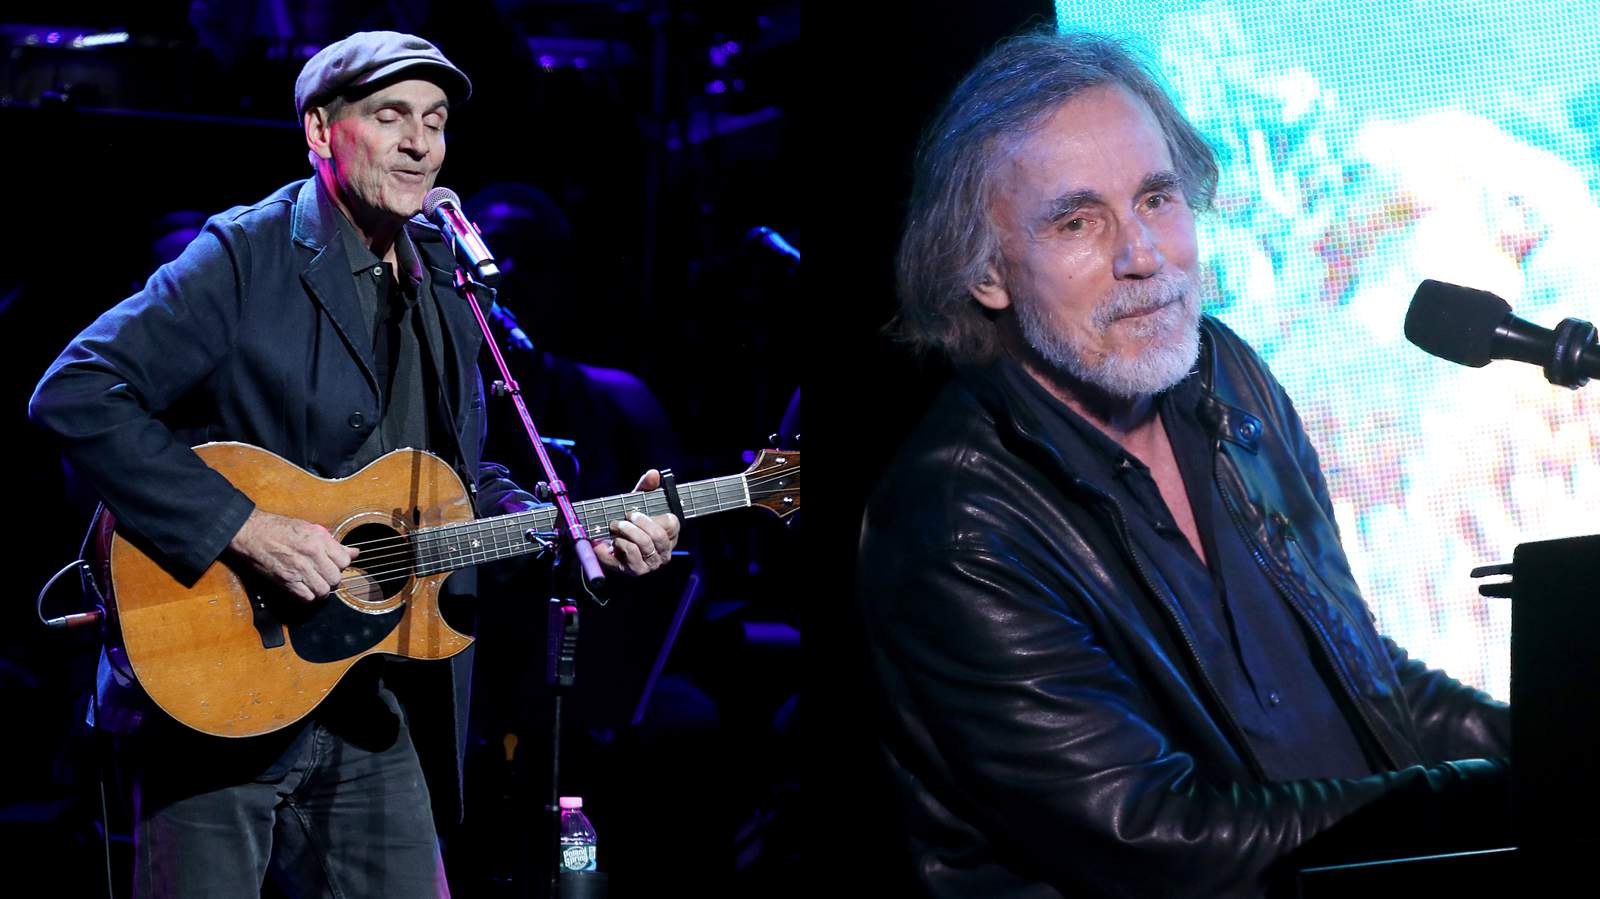 James Taylor reschedules tour with Jackson Browne, including Roanoke stop